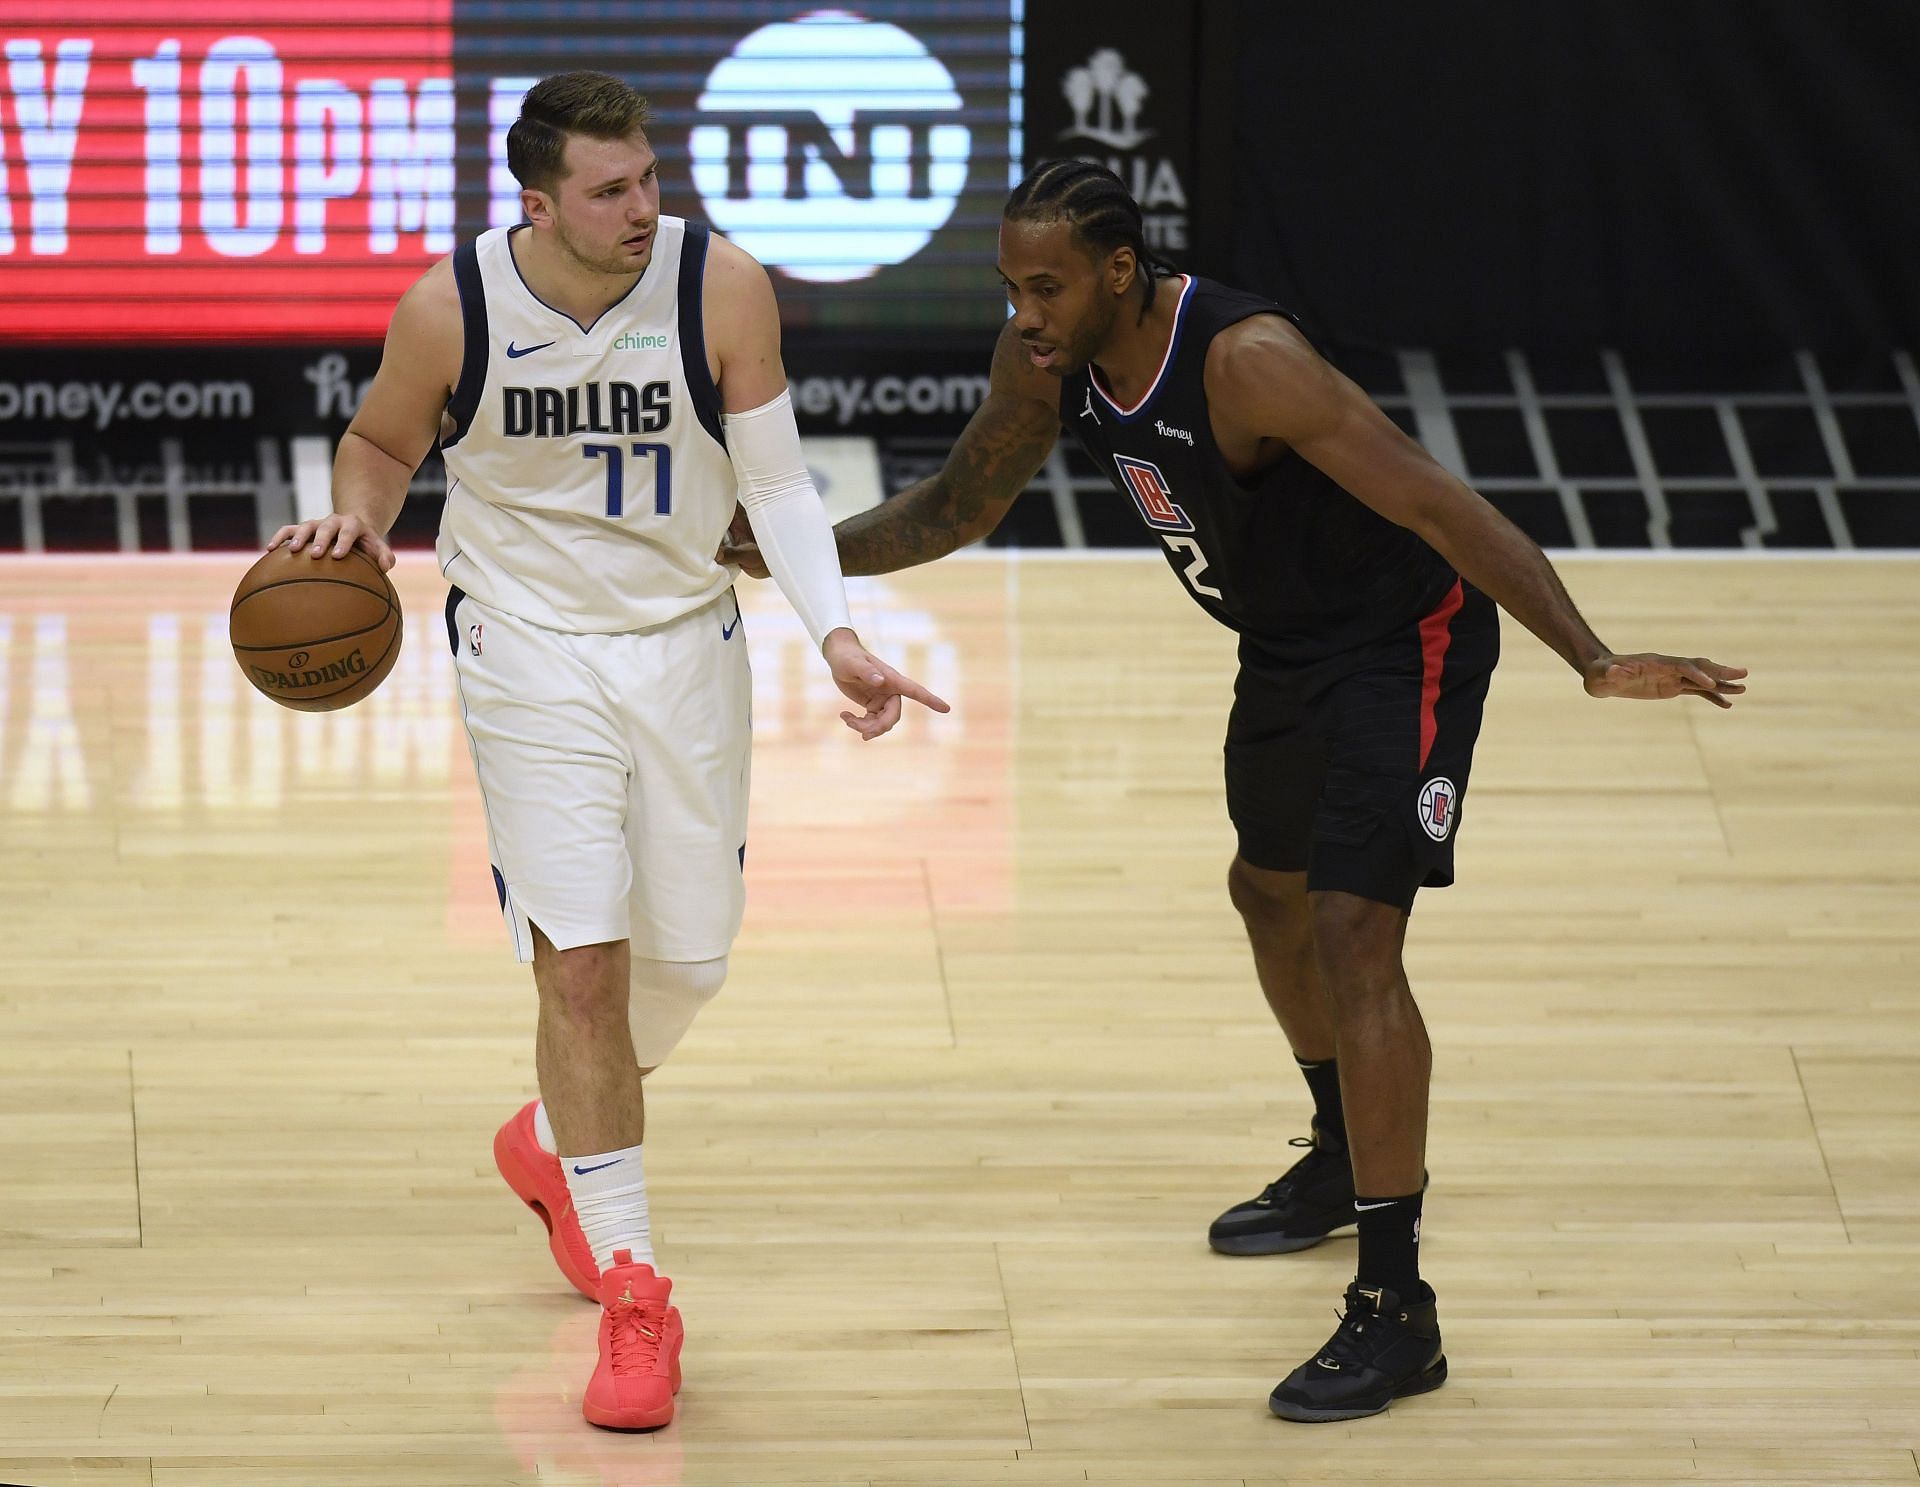 Luka Doncic #77 of the Dallas Mavericks dribbles as he is guarded by Kawhi Leonard #2 of the LA Clippers in the first quarter during game two of the Western Conference first round series at Staples Center on May 25, 2021 in Los Angeles, California.